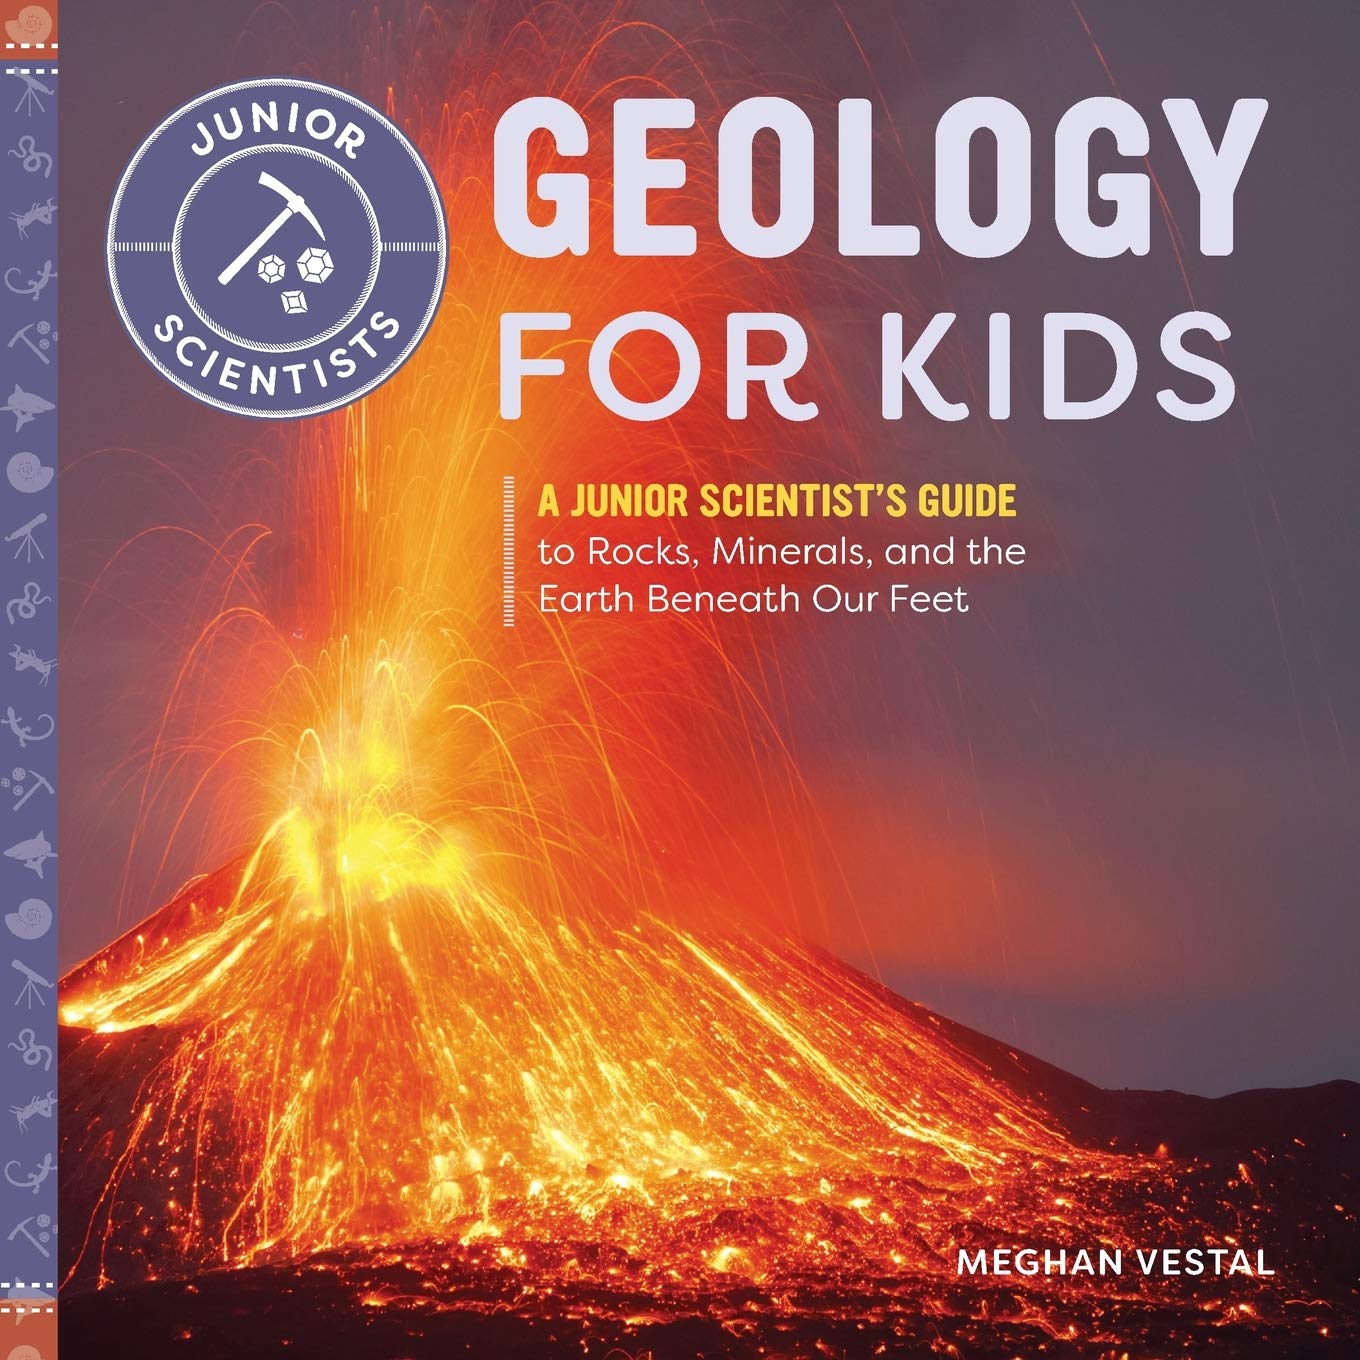 Geology for Kids: A Junior Scientist's Guide to Rocks, Minerals, and the Earth Beneath Our Feet